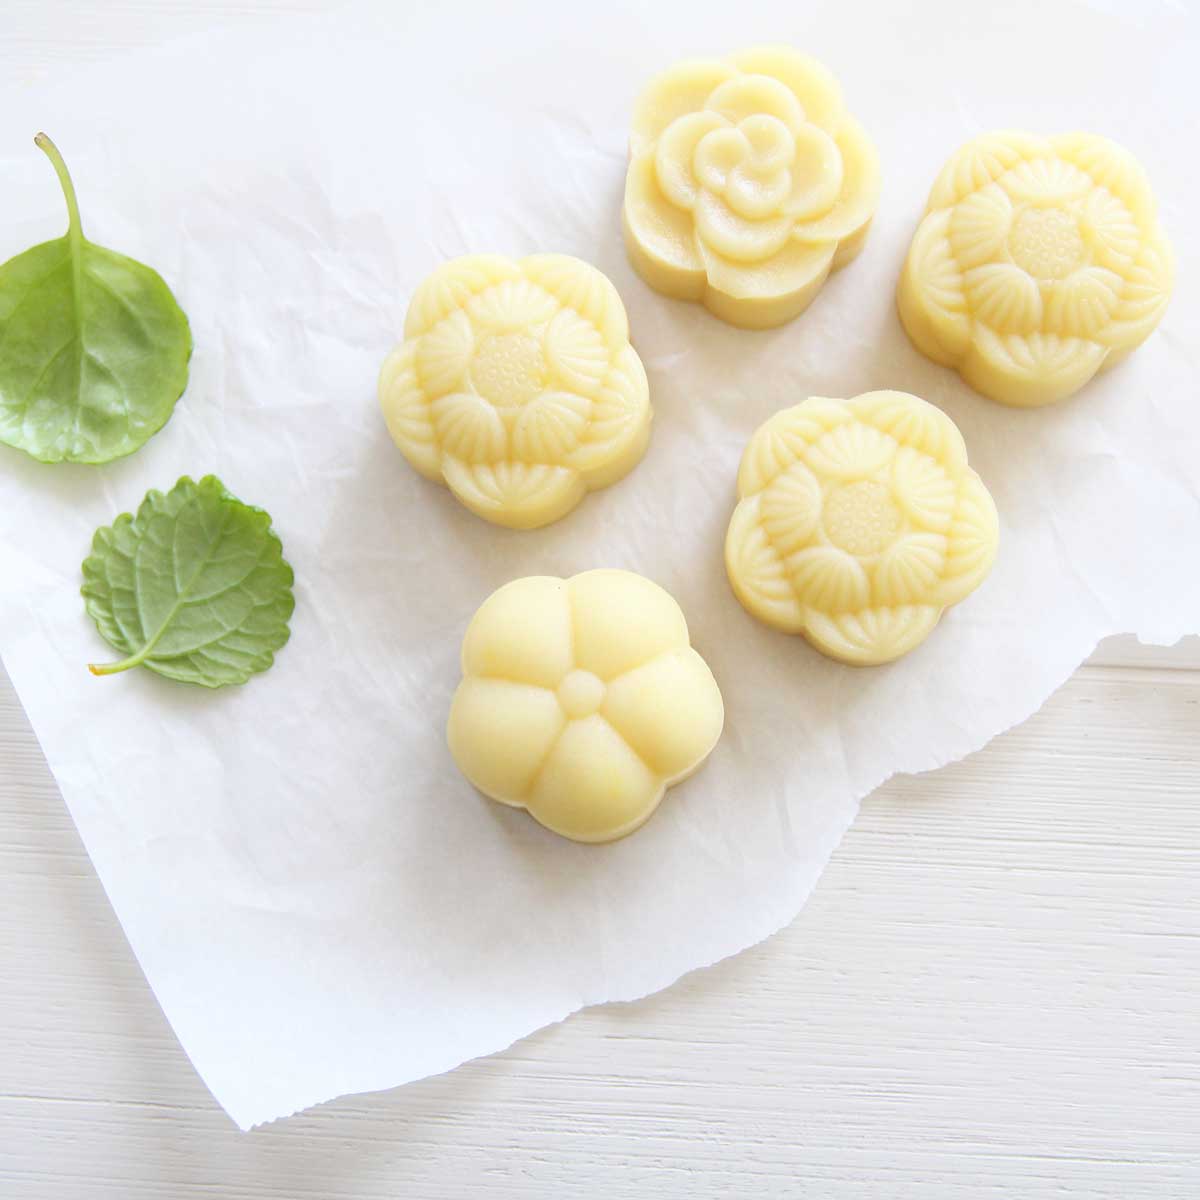 Homemade Durian Snow Skin Mooncakes with Mung Bean Filling - Brown Sugar Whipped Cream